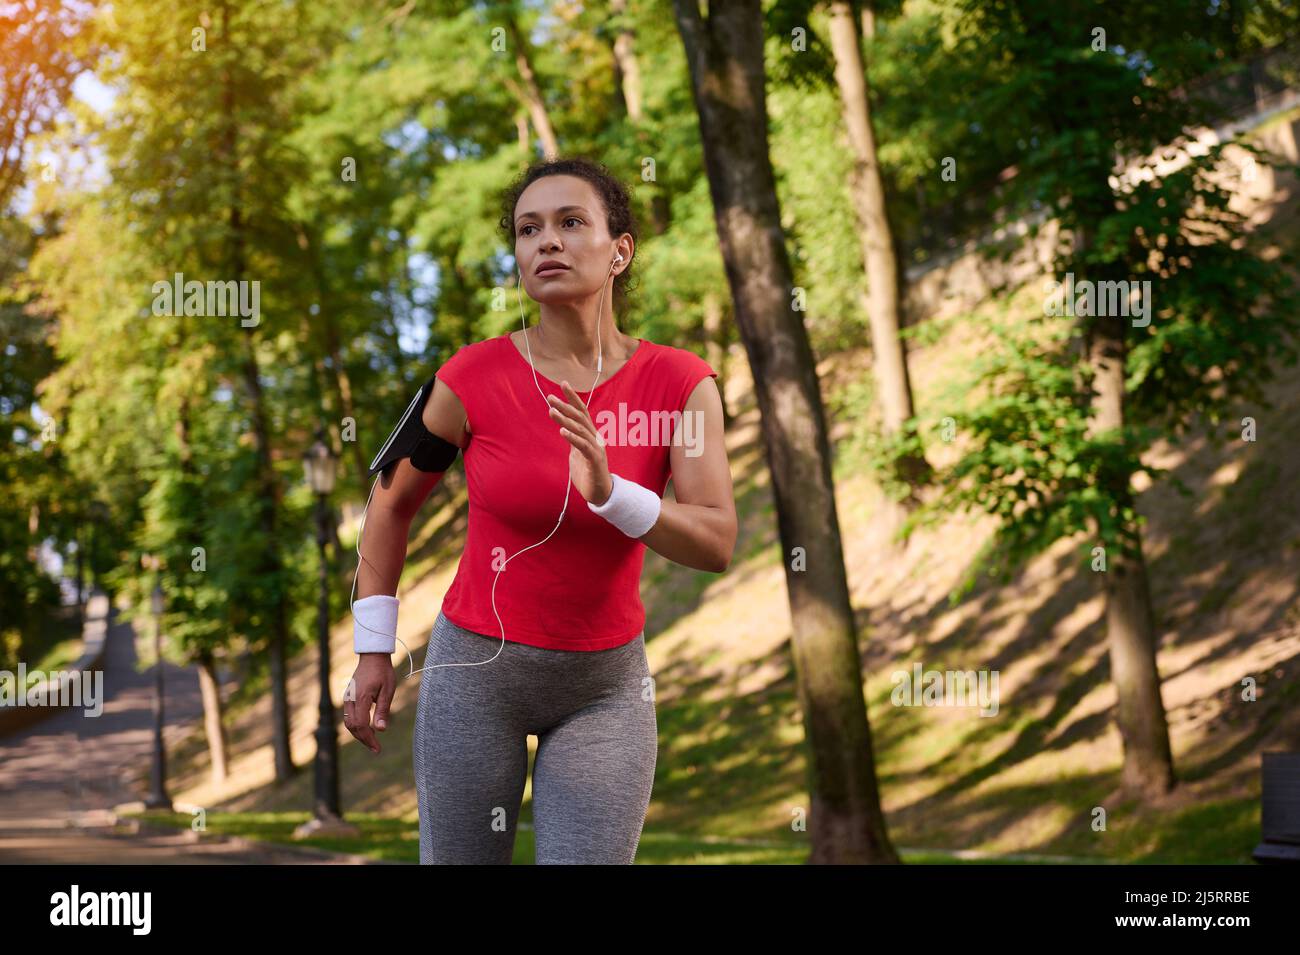 Attractive strength muscular multi ethnic woman with healthy beautiful aesthetic fit body in tight sportswear with earphones and smartphone holder run Stock Photo